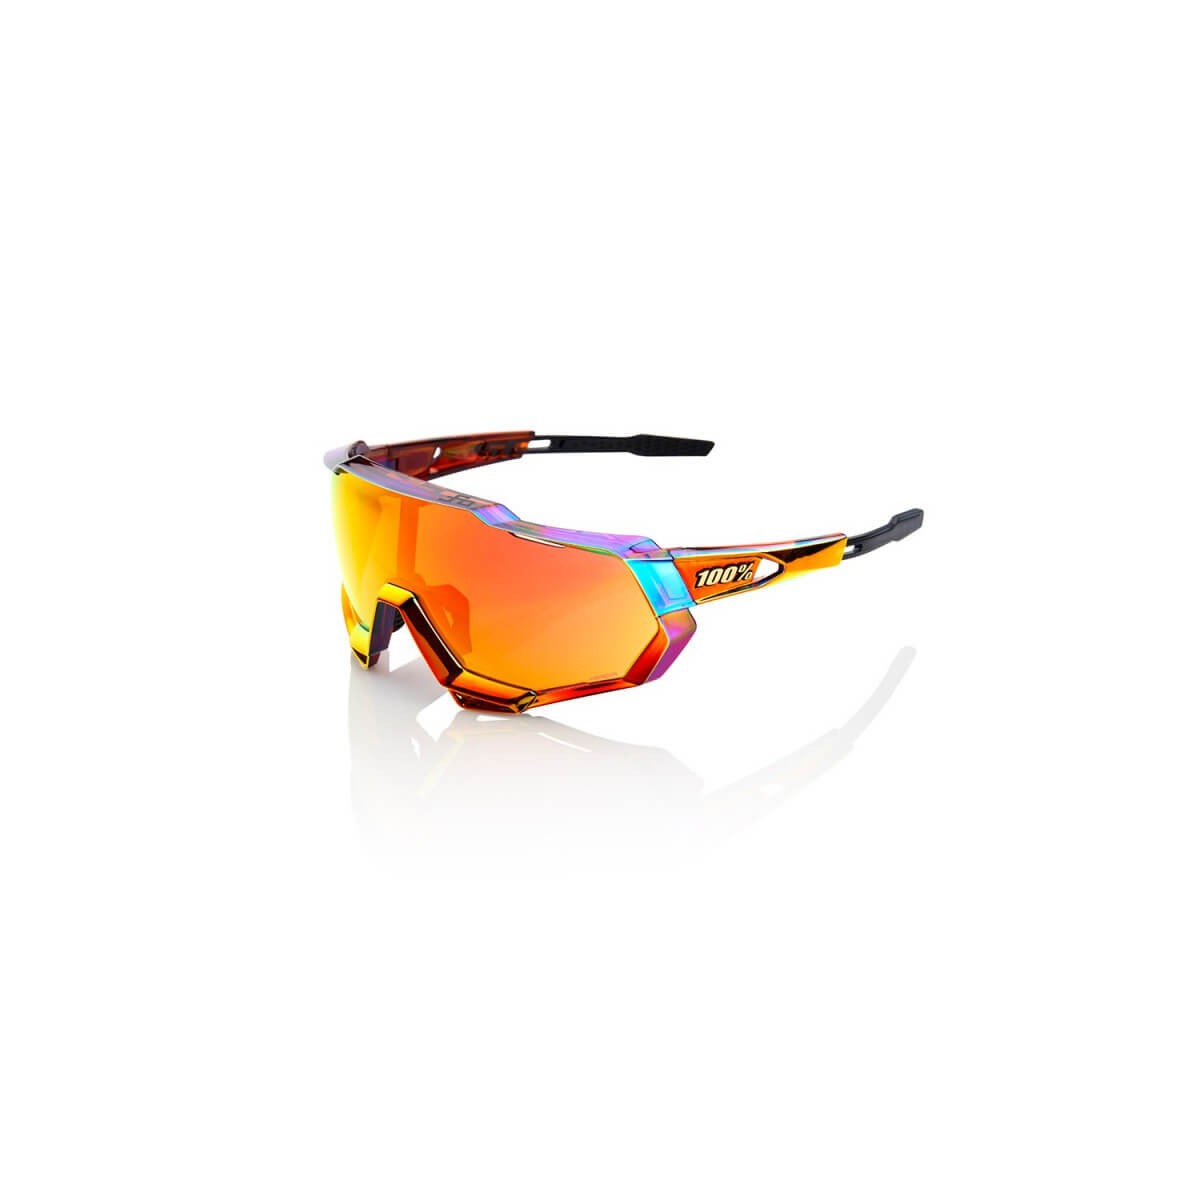 Image of Brille 100% SPEEDTRAP PETER SAGAN LIMITED EDITION (HD MULTILAYER RED MIRROR LENS)